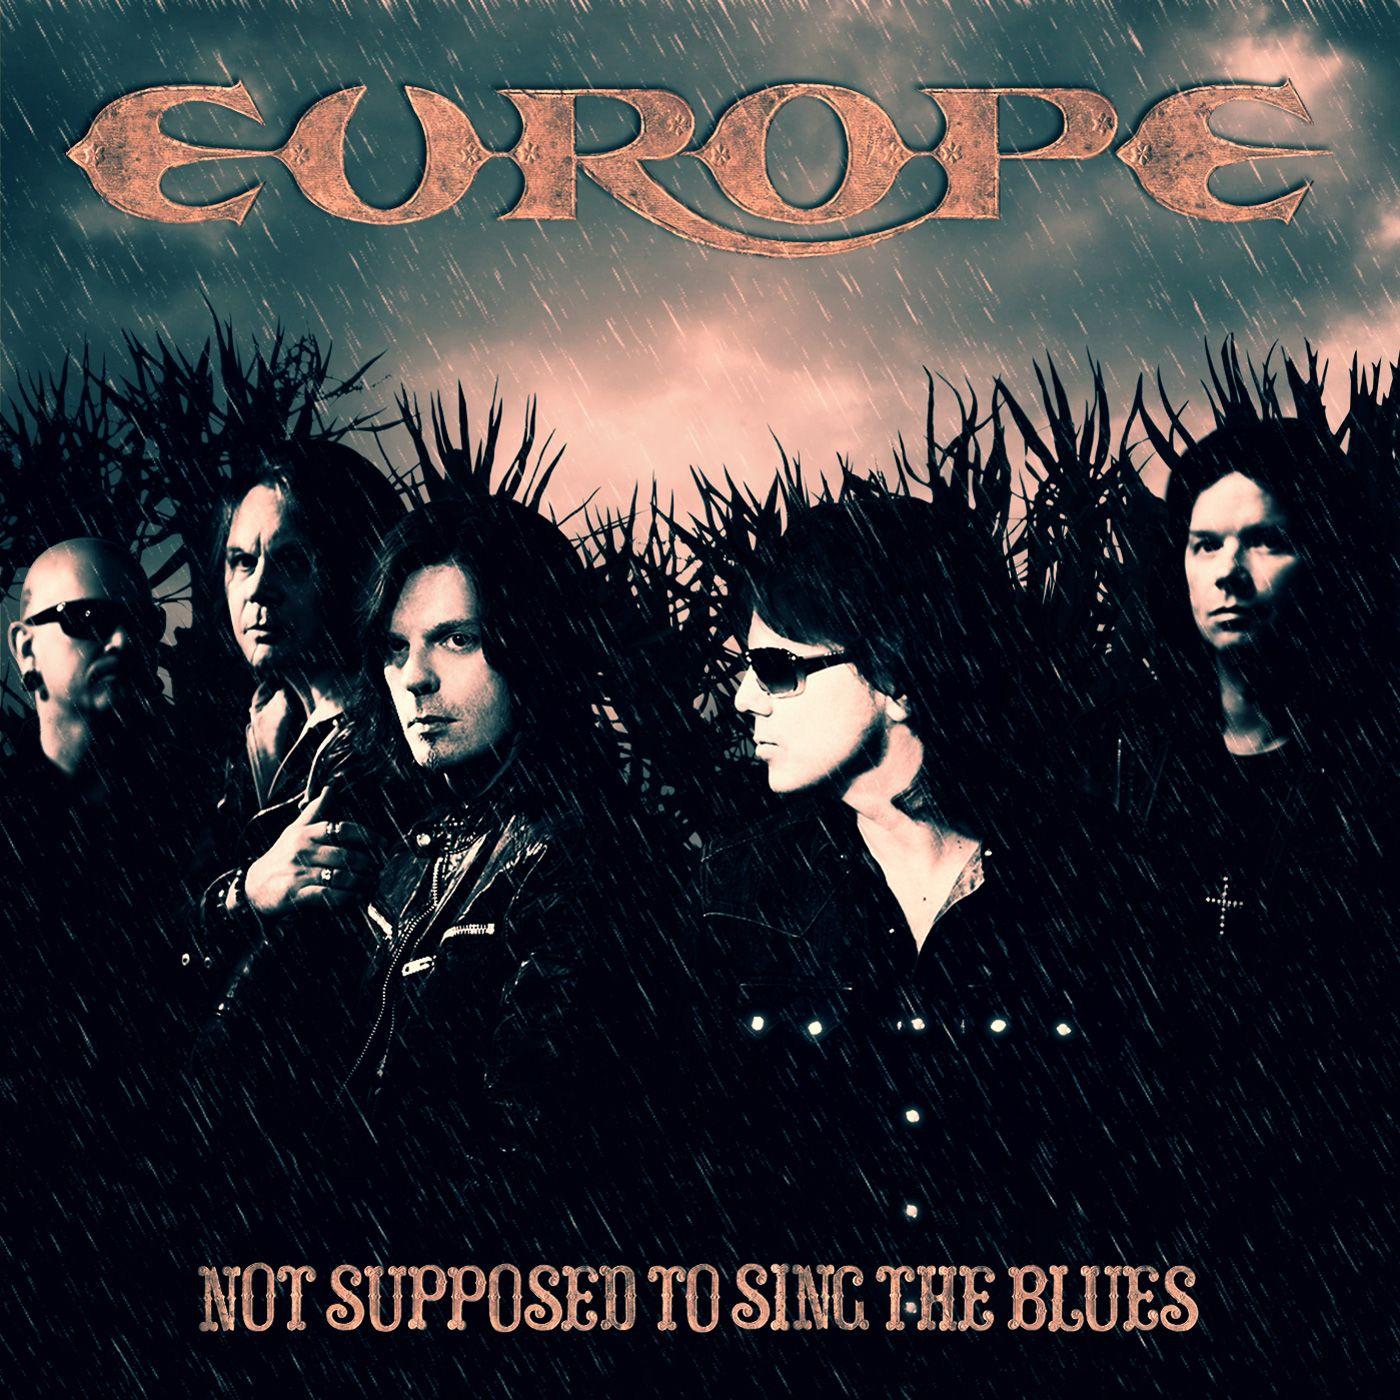 Europe The Band Wallpaper